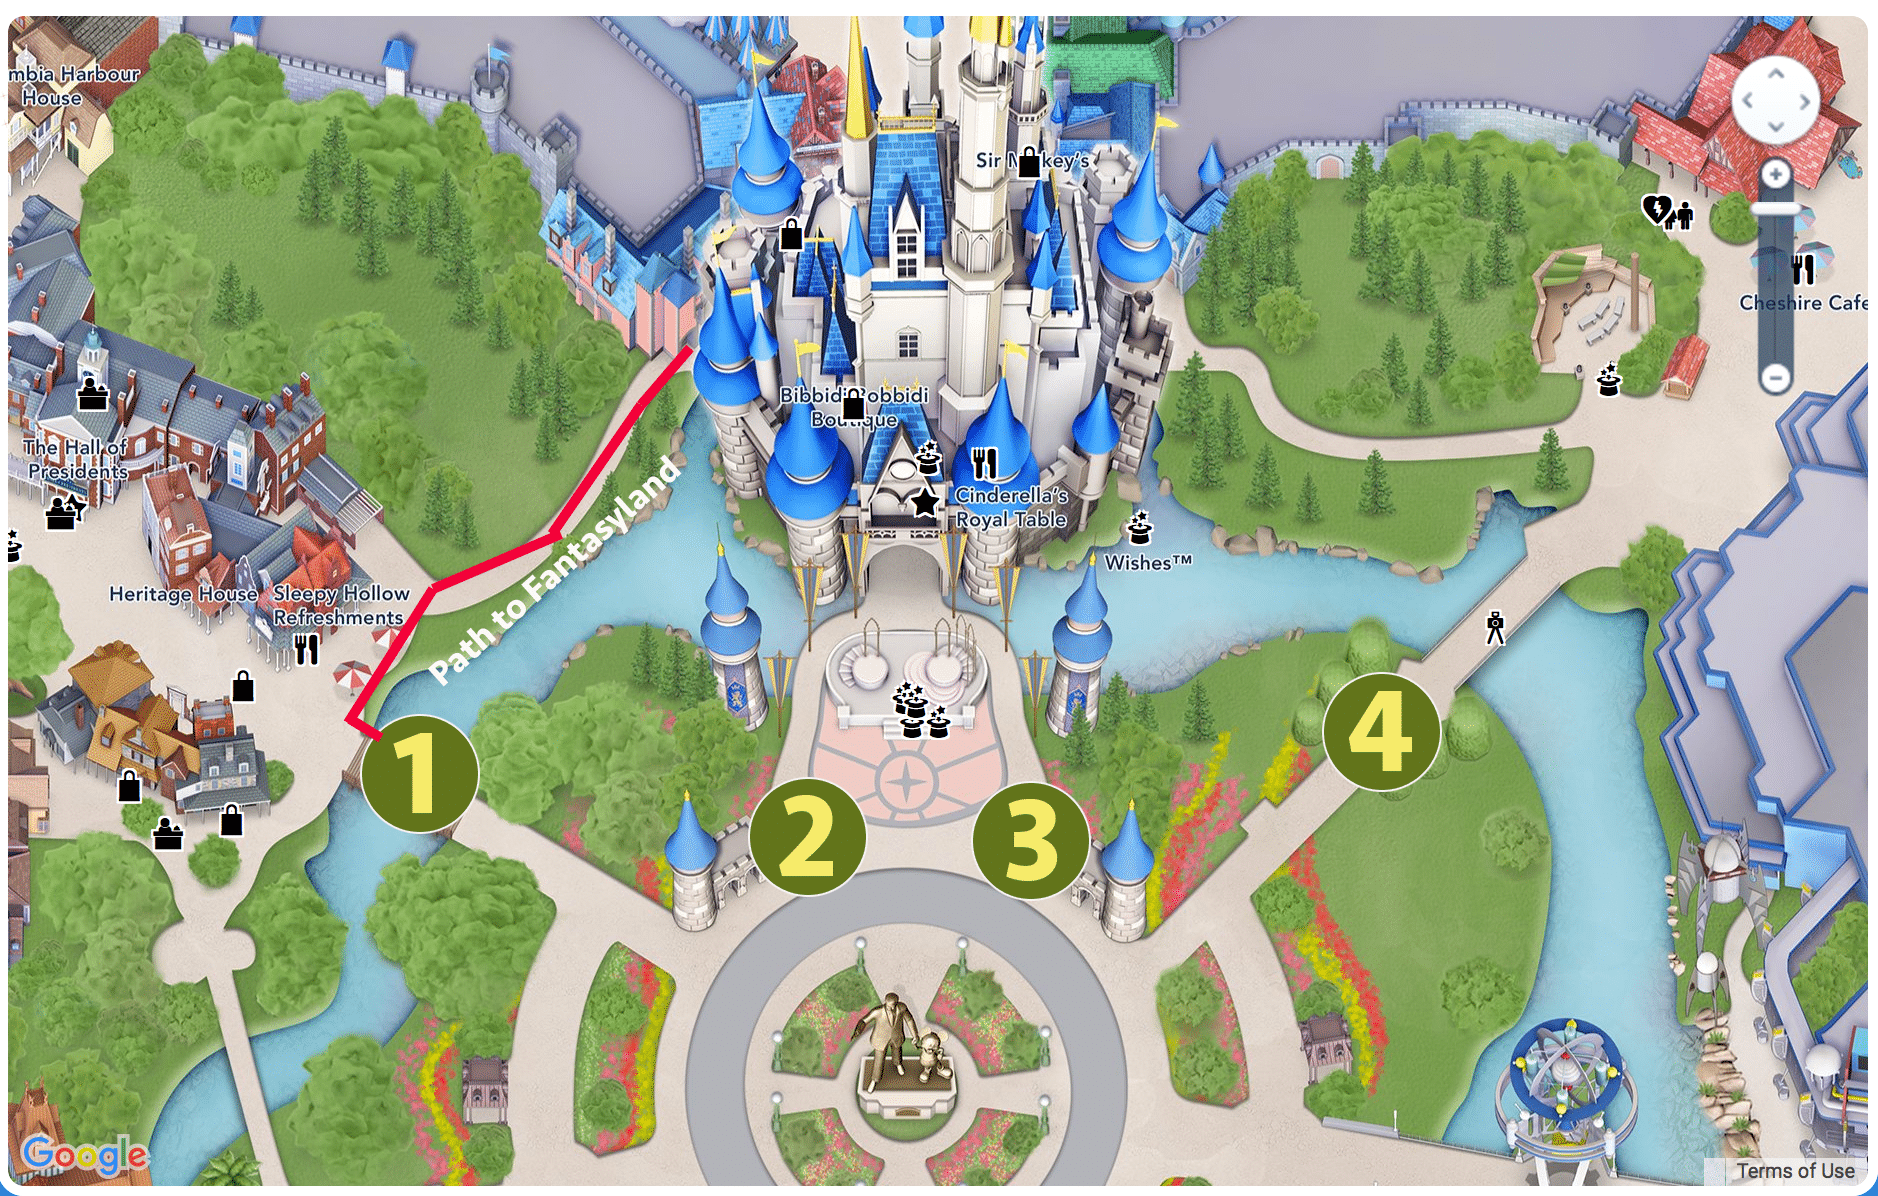 About the new Magic Kingdom opening procedure